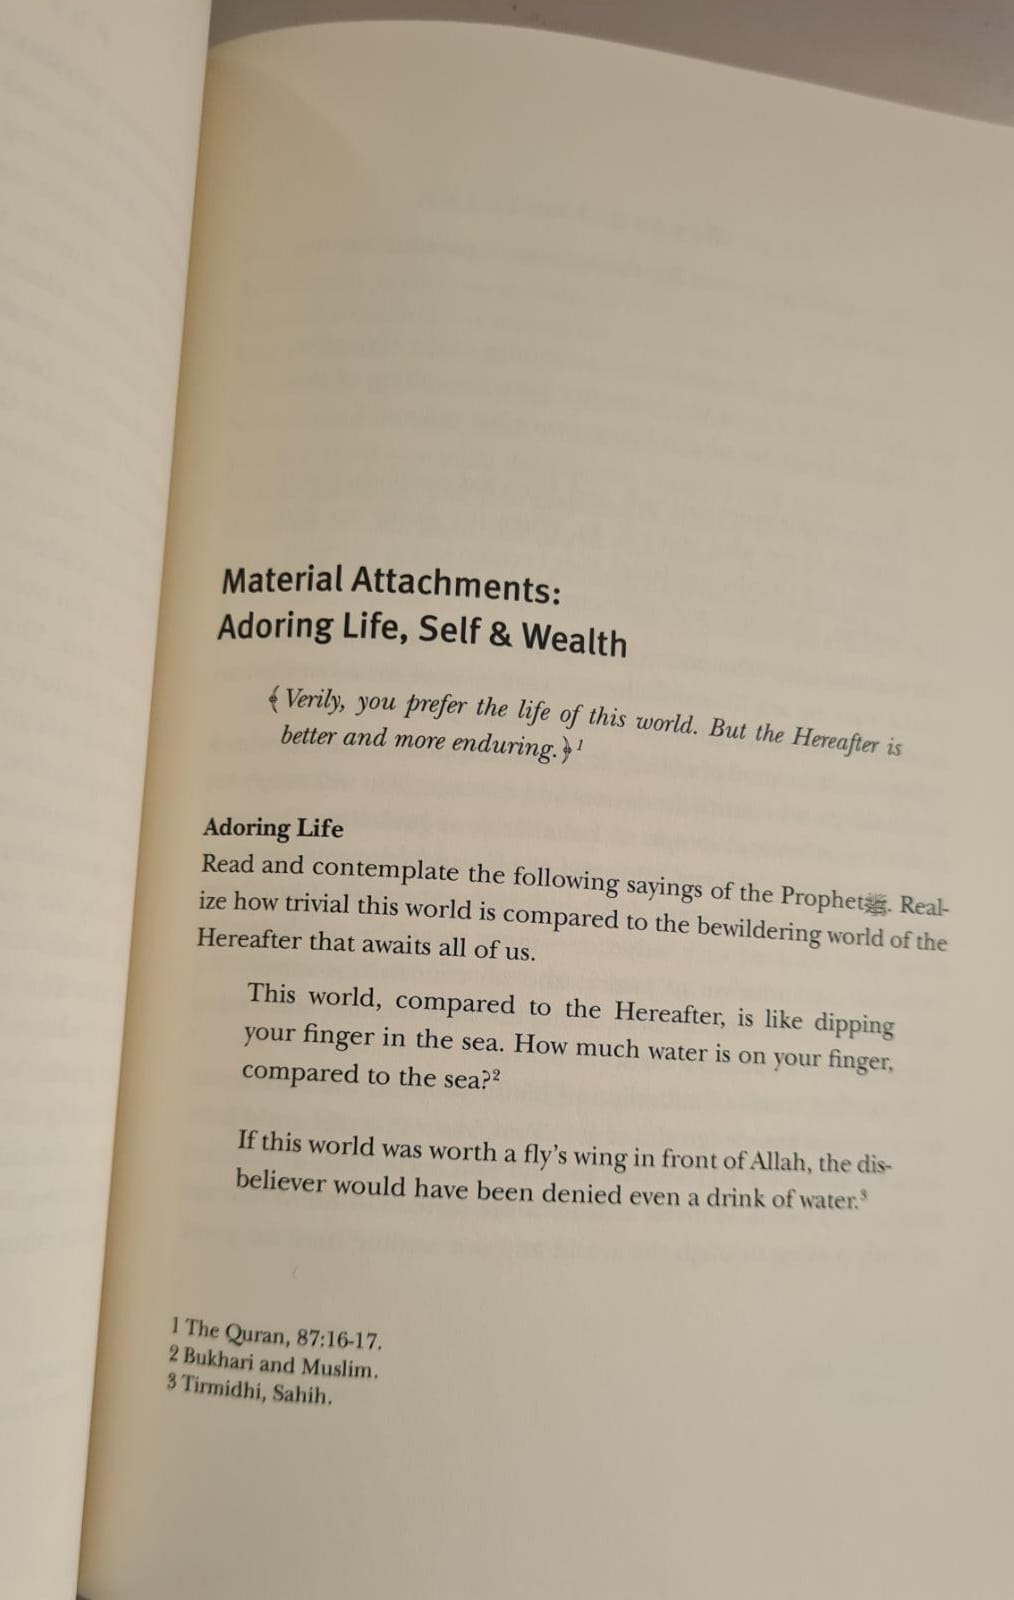 Rising Soul: A Guide to Personal Development